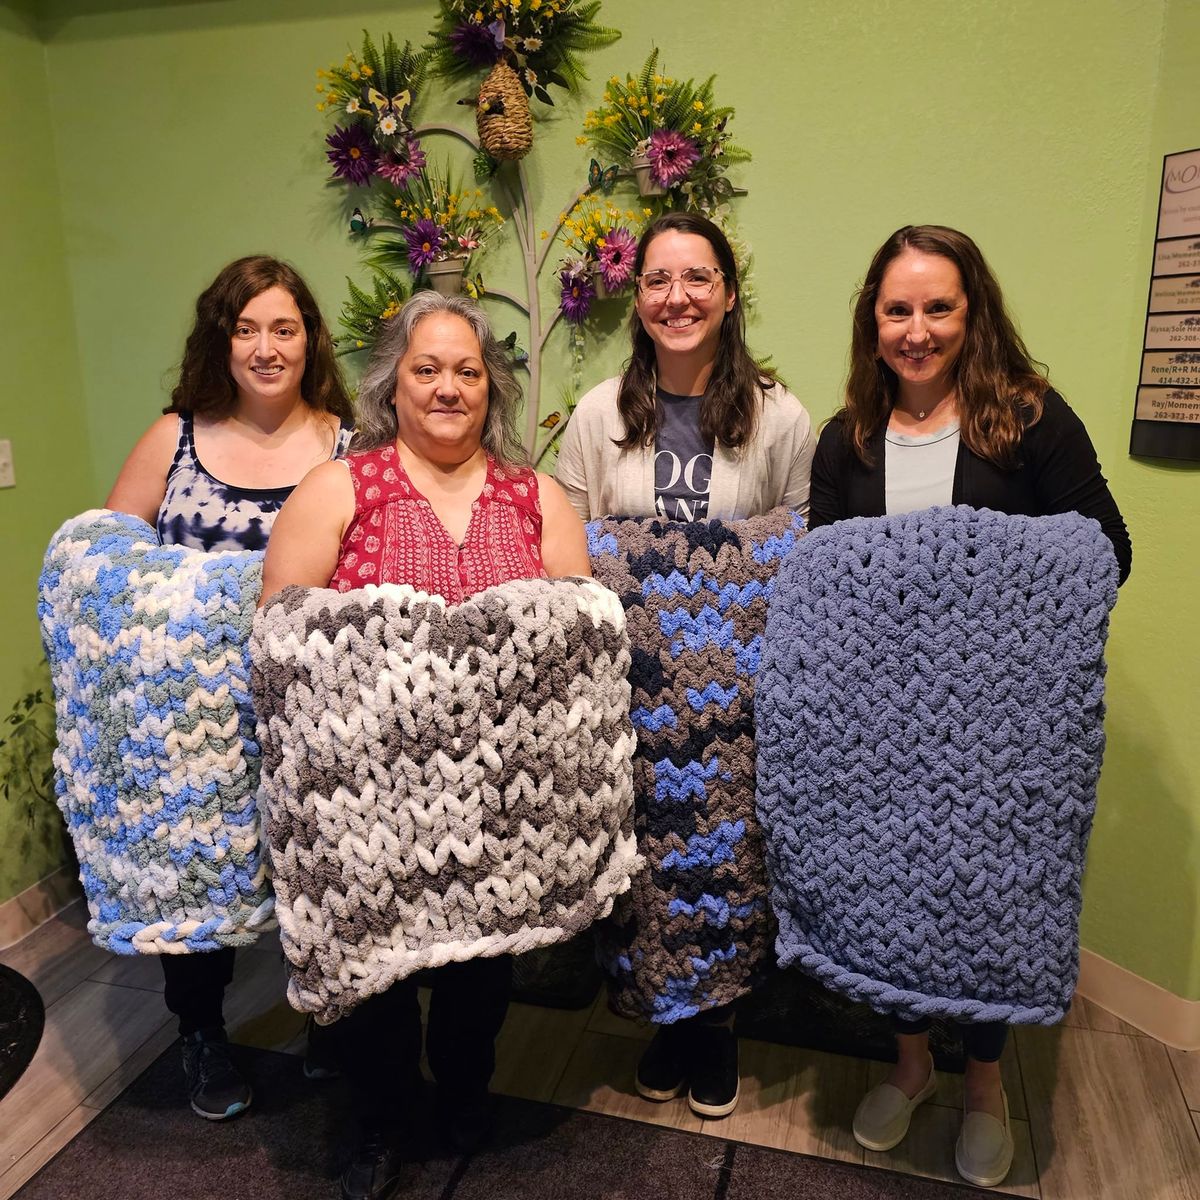 7 SPOTS LEFT! Sept 21- Lake Aire Coffee Bar Chunky Knit Blanket Workshop 